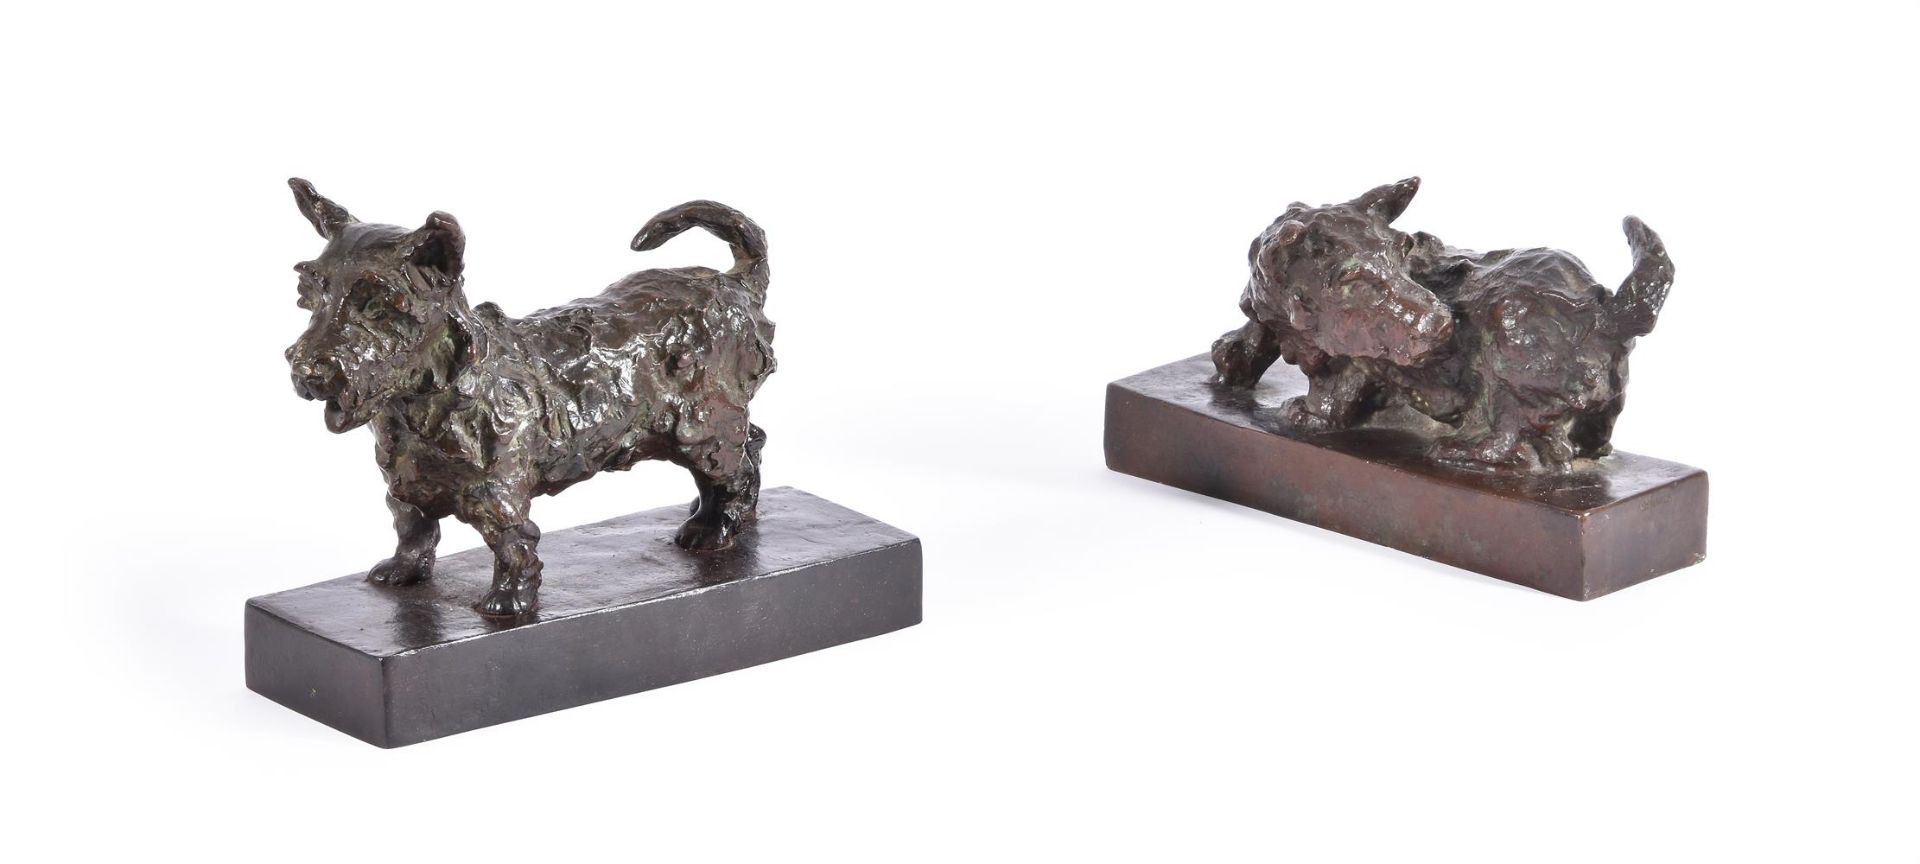 EDITH BARRETTO STEVENS PARSONS (AMERICAN, 1878-1956), A PAIR OF BRONZE MODELS OF TERRIERS